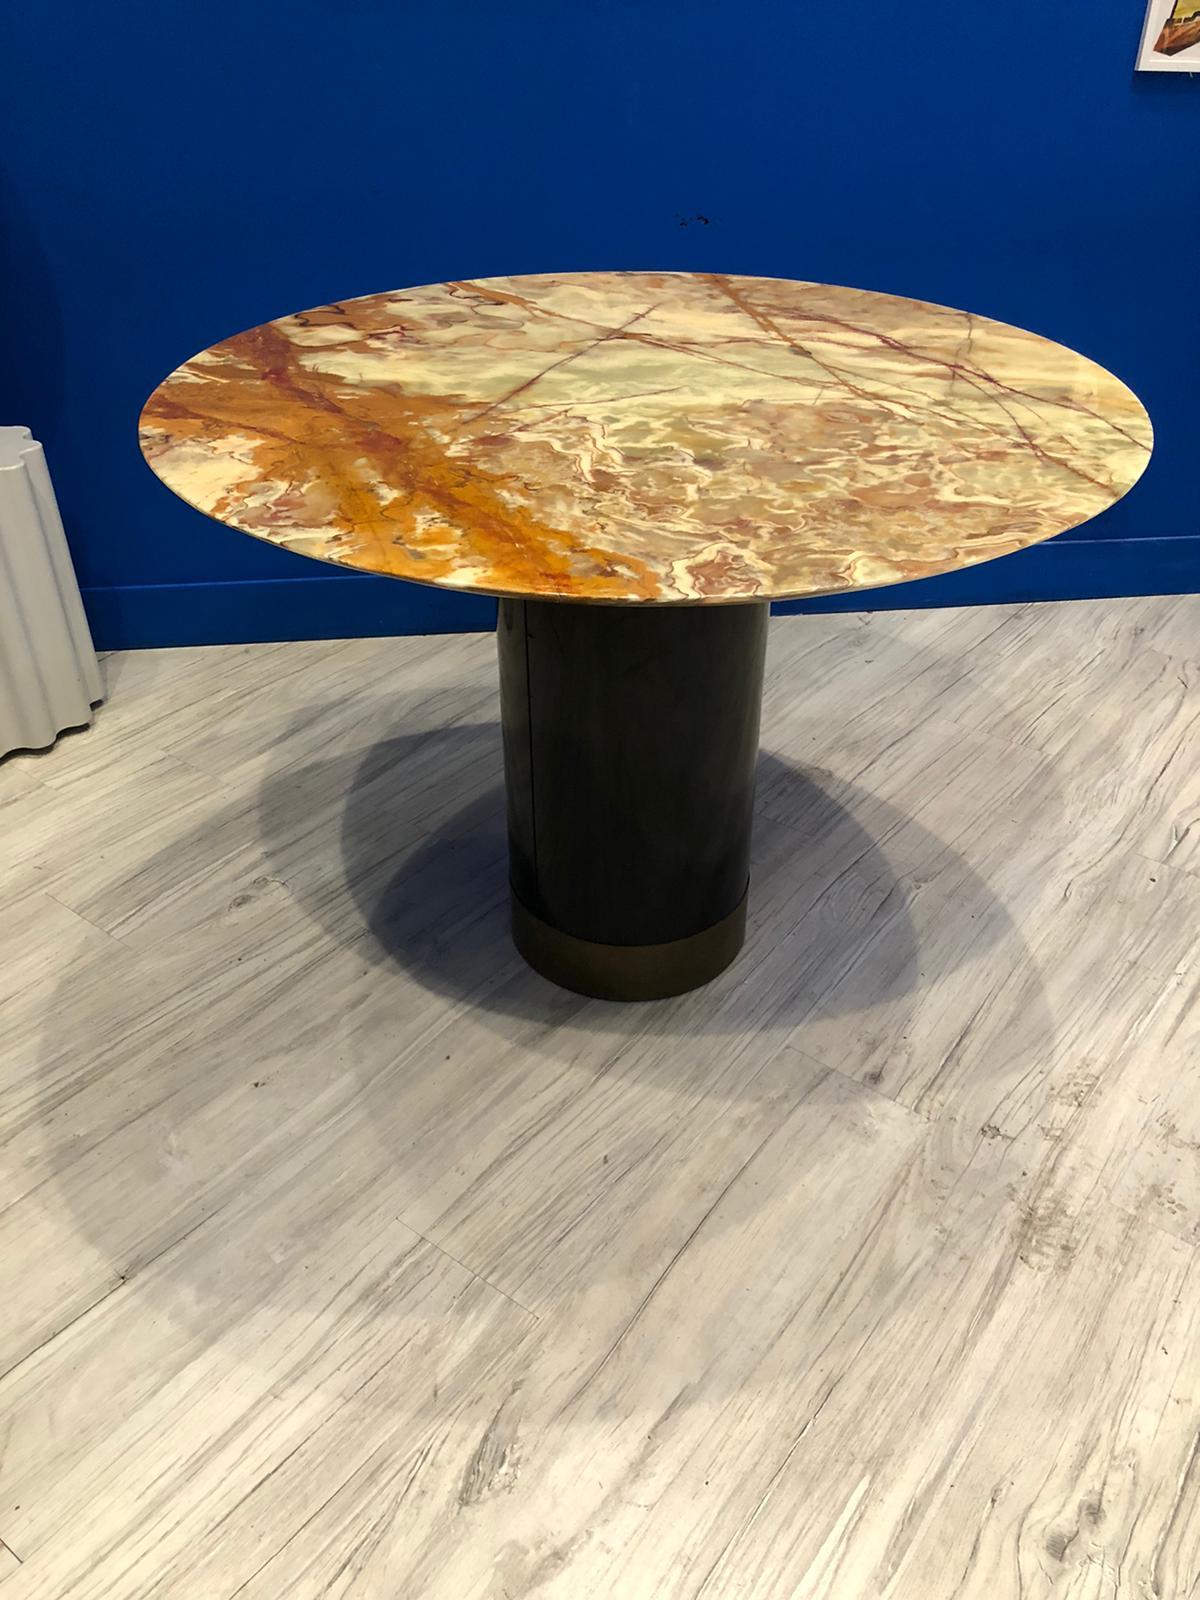 Mid-Century Modern Italian Round Table 1950s Onyx Marble Top Wiith Black Wooden Base and Brass Band